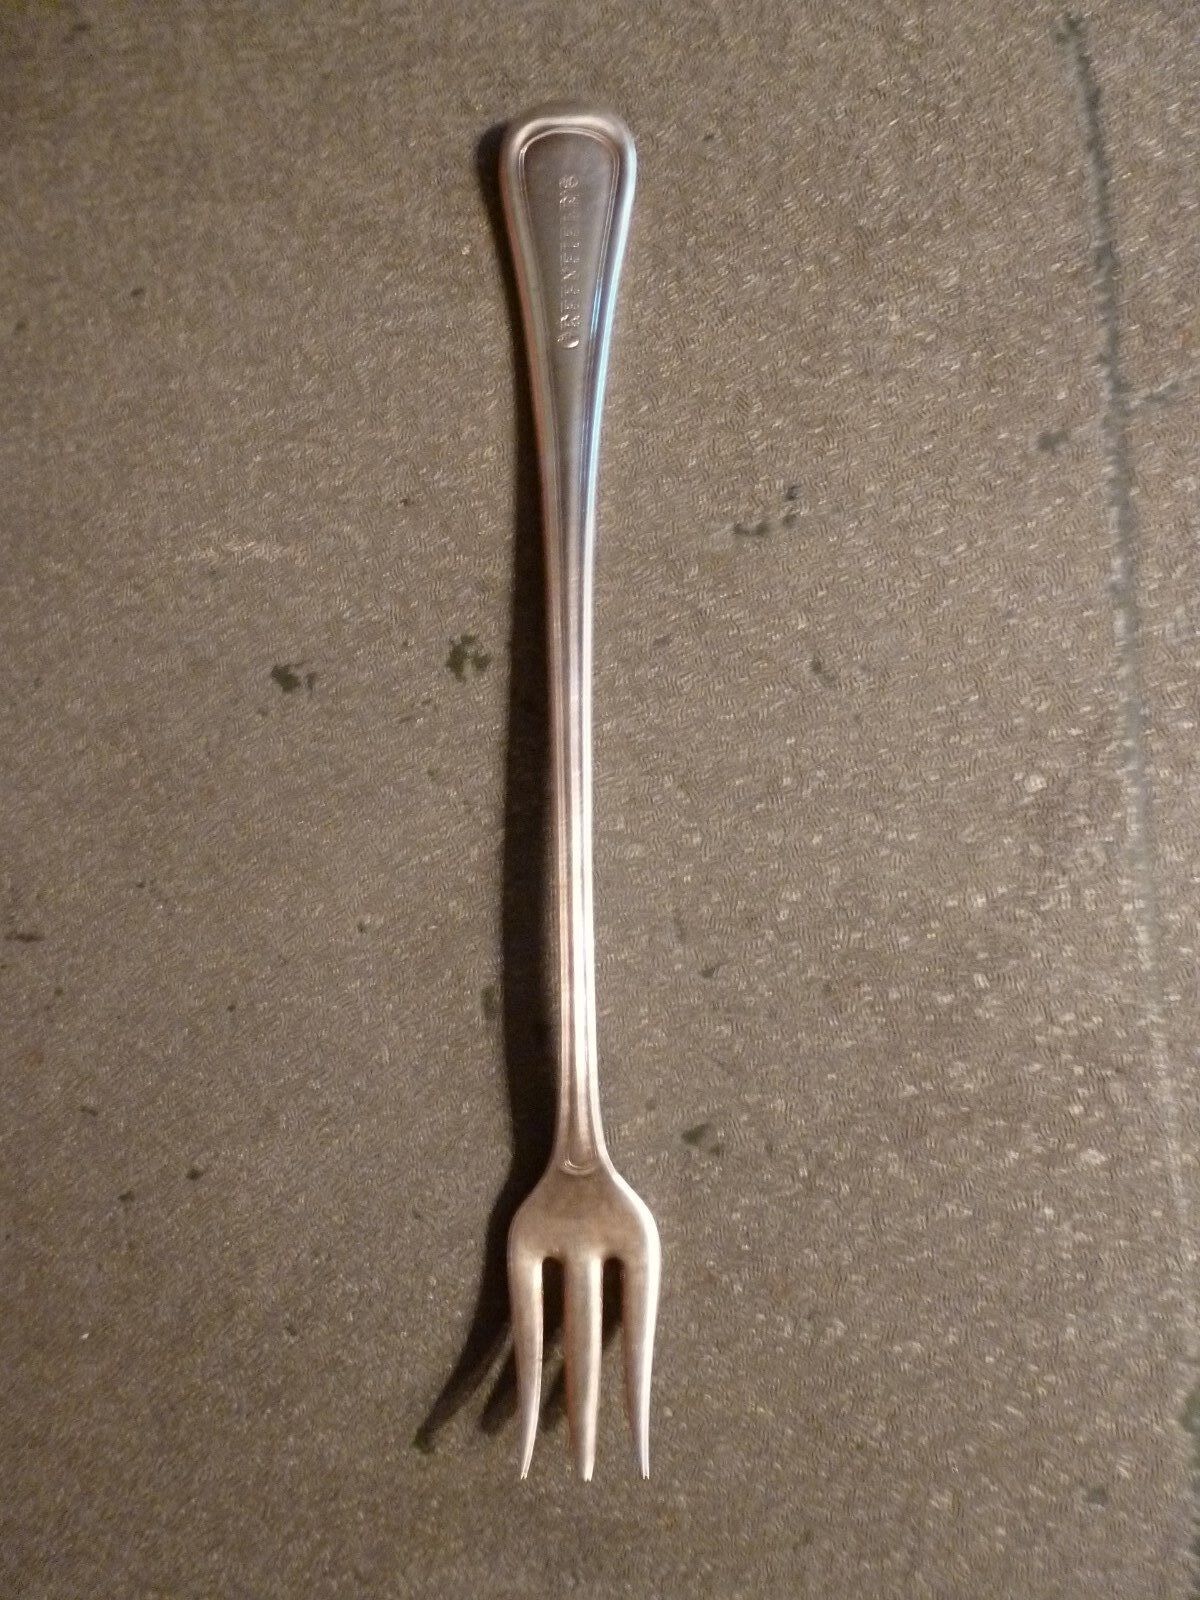 WM. A ROGERS HOTEL PLATE ONEDIA LTD. RARE PICKLE FORK ENGRAVED GREENFIELD\'S WOW